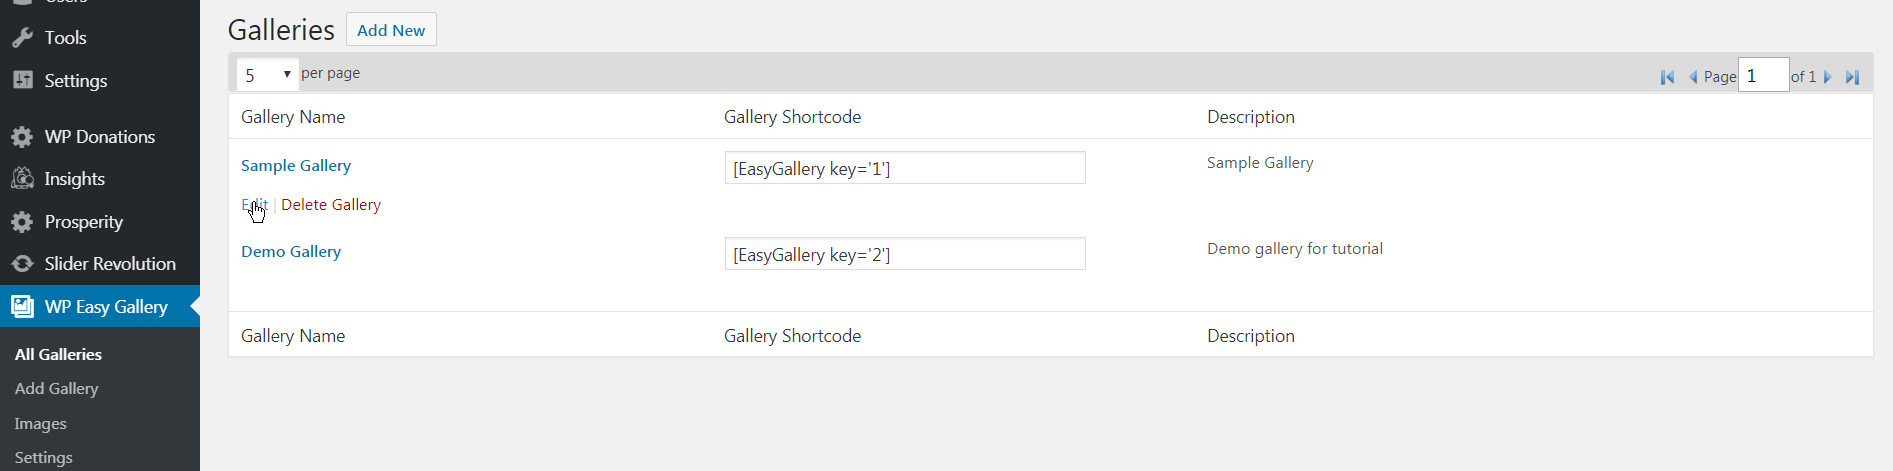 Easy to use Admin interface for editing galleries